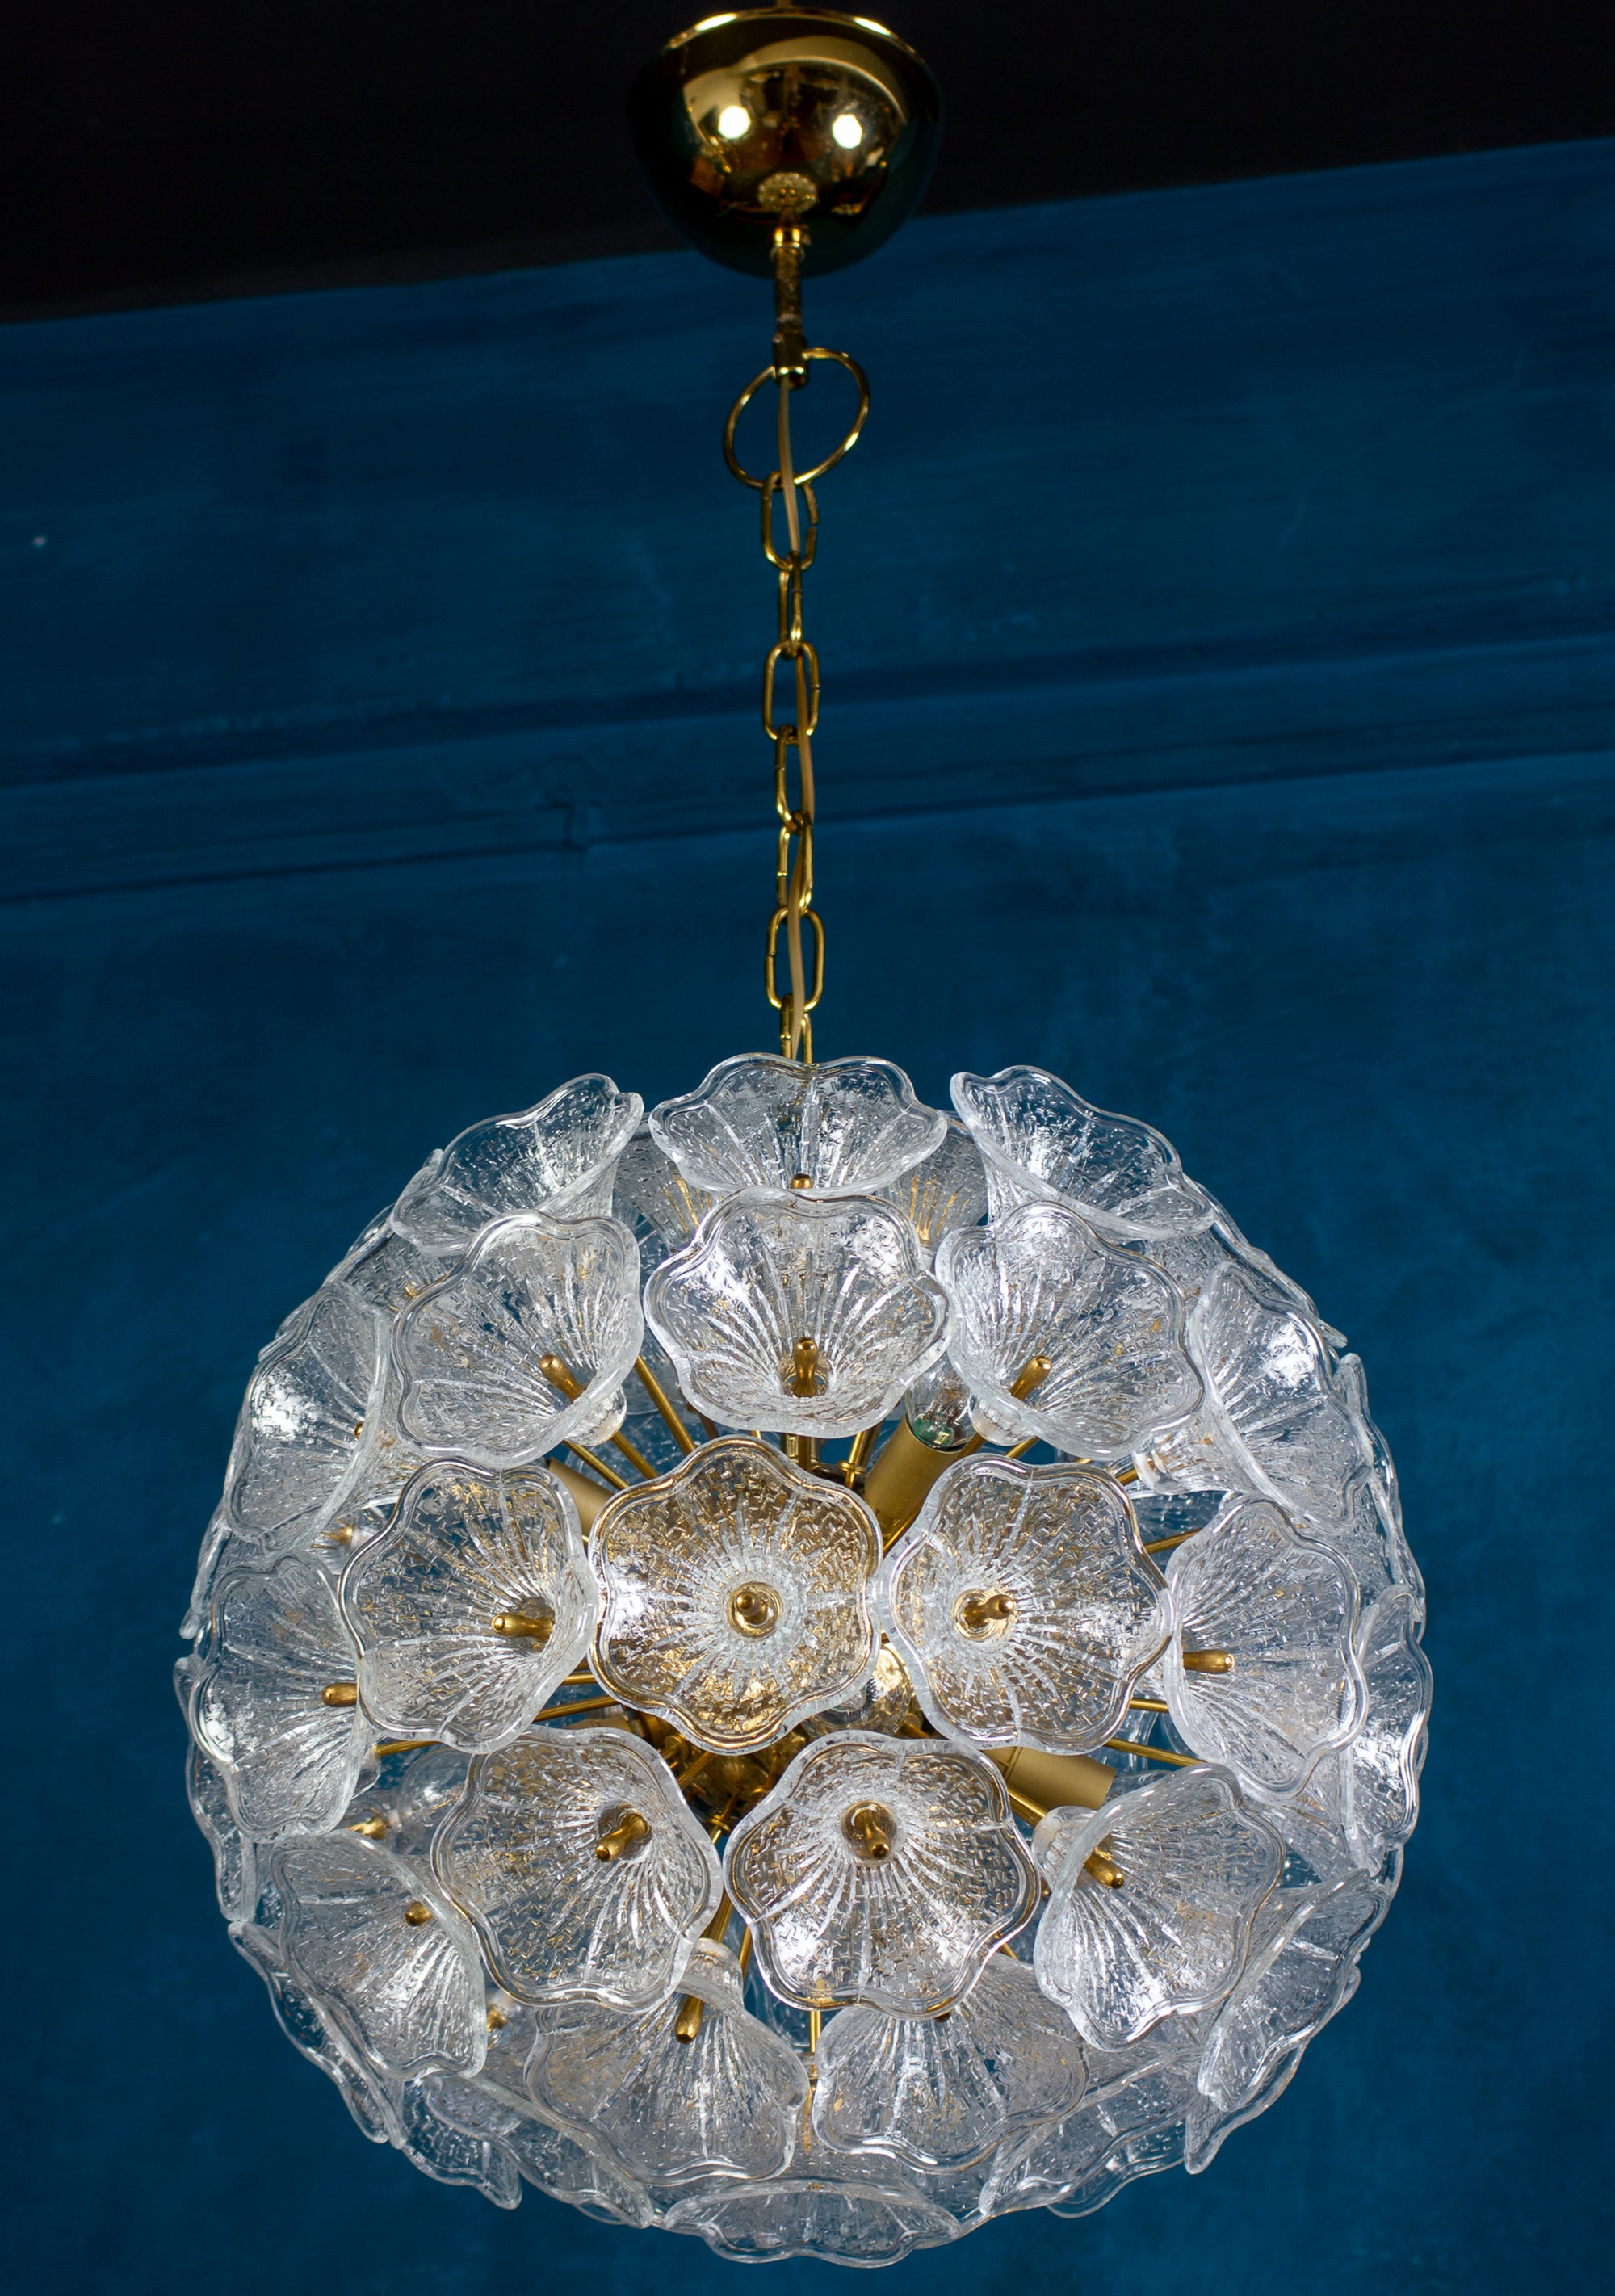 Sputnik Flower Murano glass chandelier by Paolo Venini for VeArt, Italy. Covered in molded ice structure glass flower on a brass Sputnik frame. 
A beautiful clear natural look like a jewel in your living room. In good original condition with minor